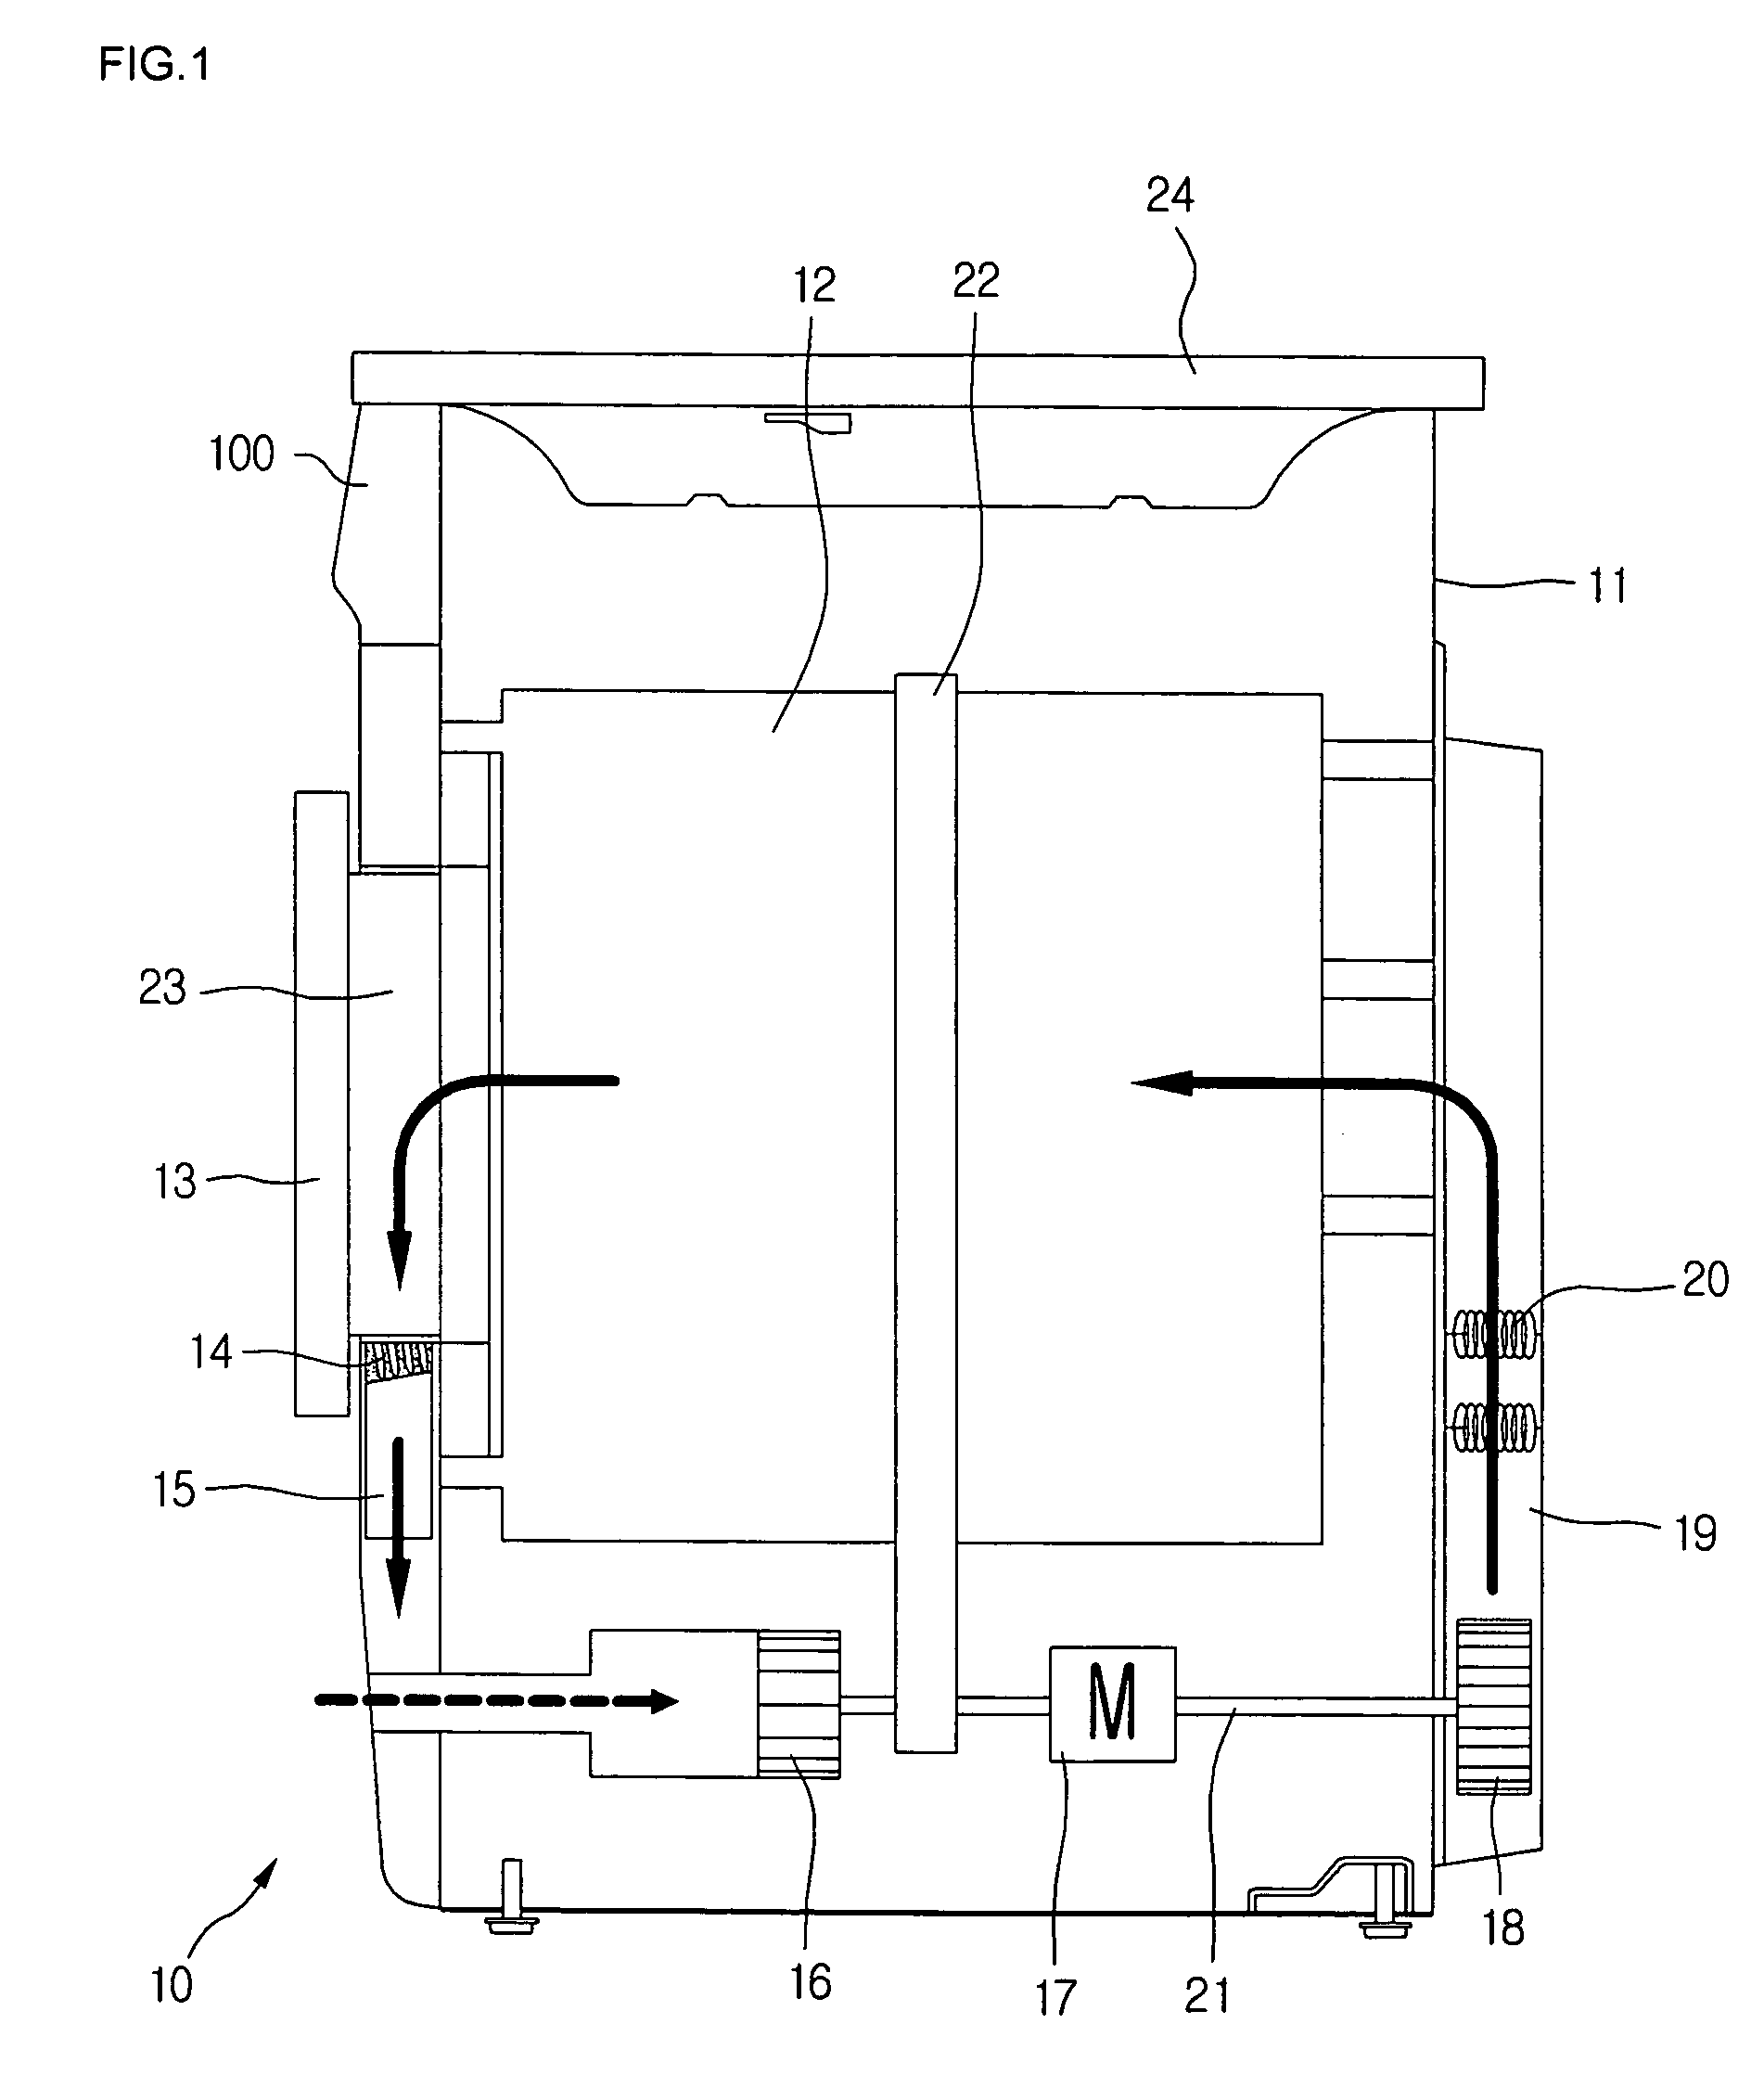 Condensed water storing apparatus of a dryer